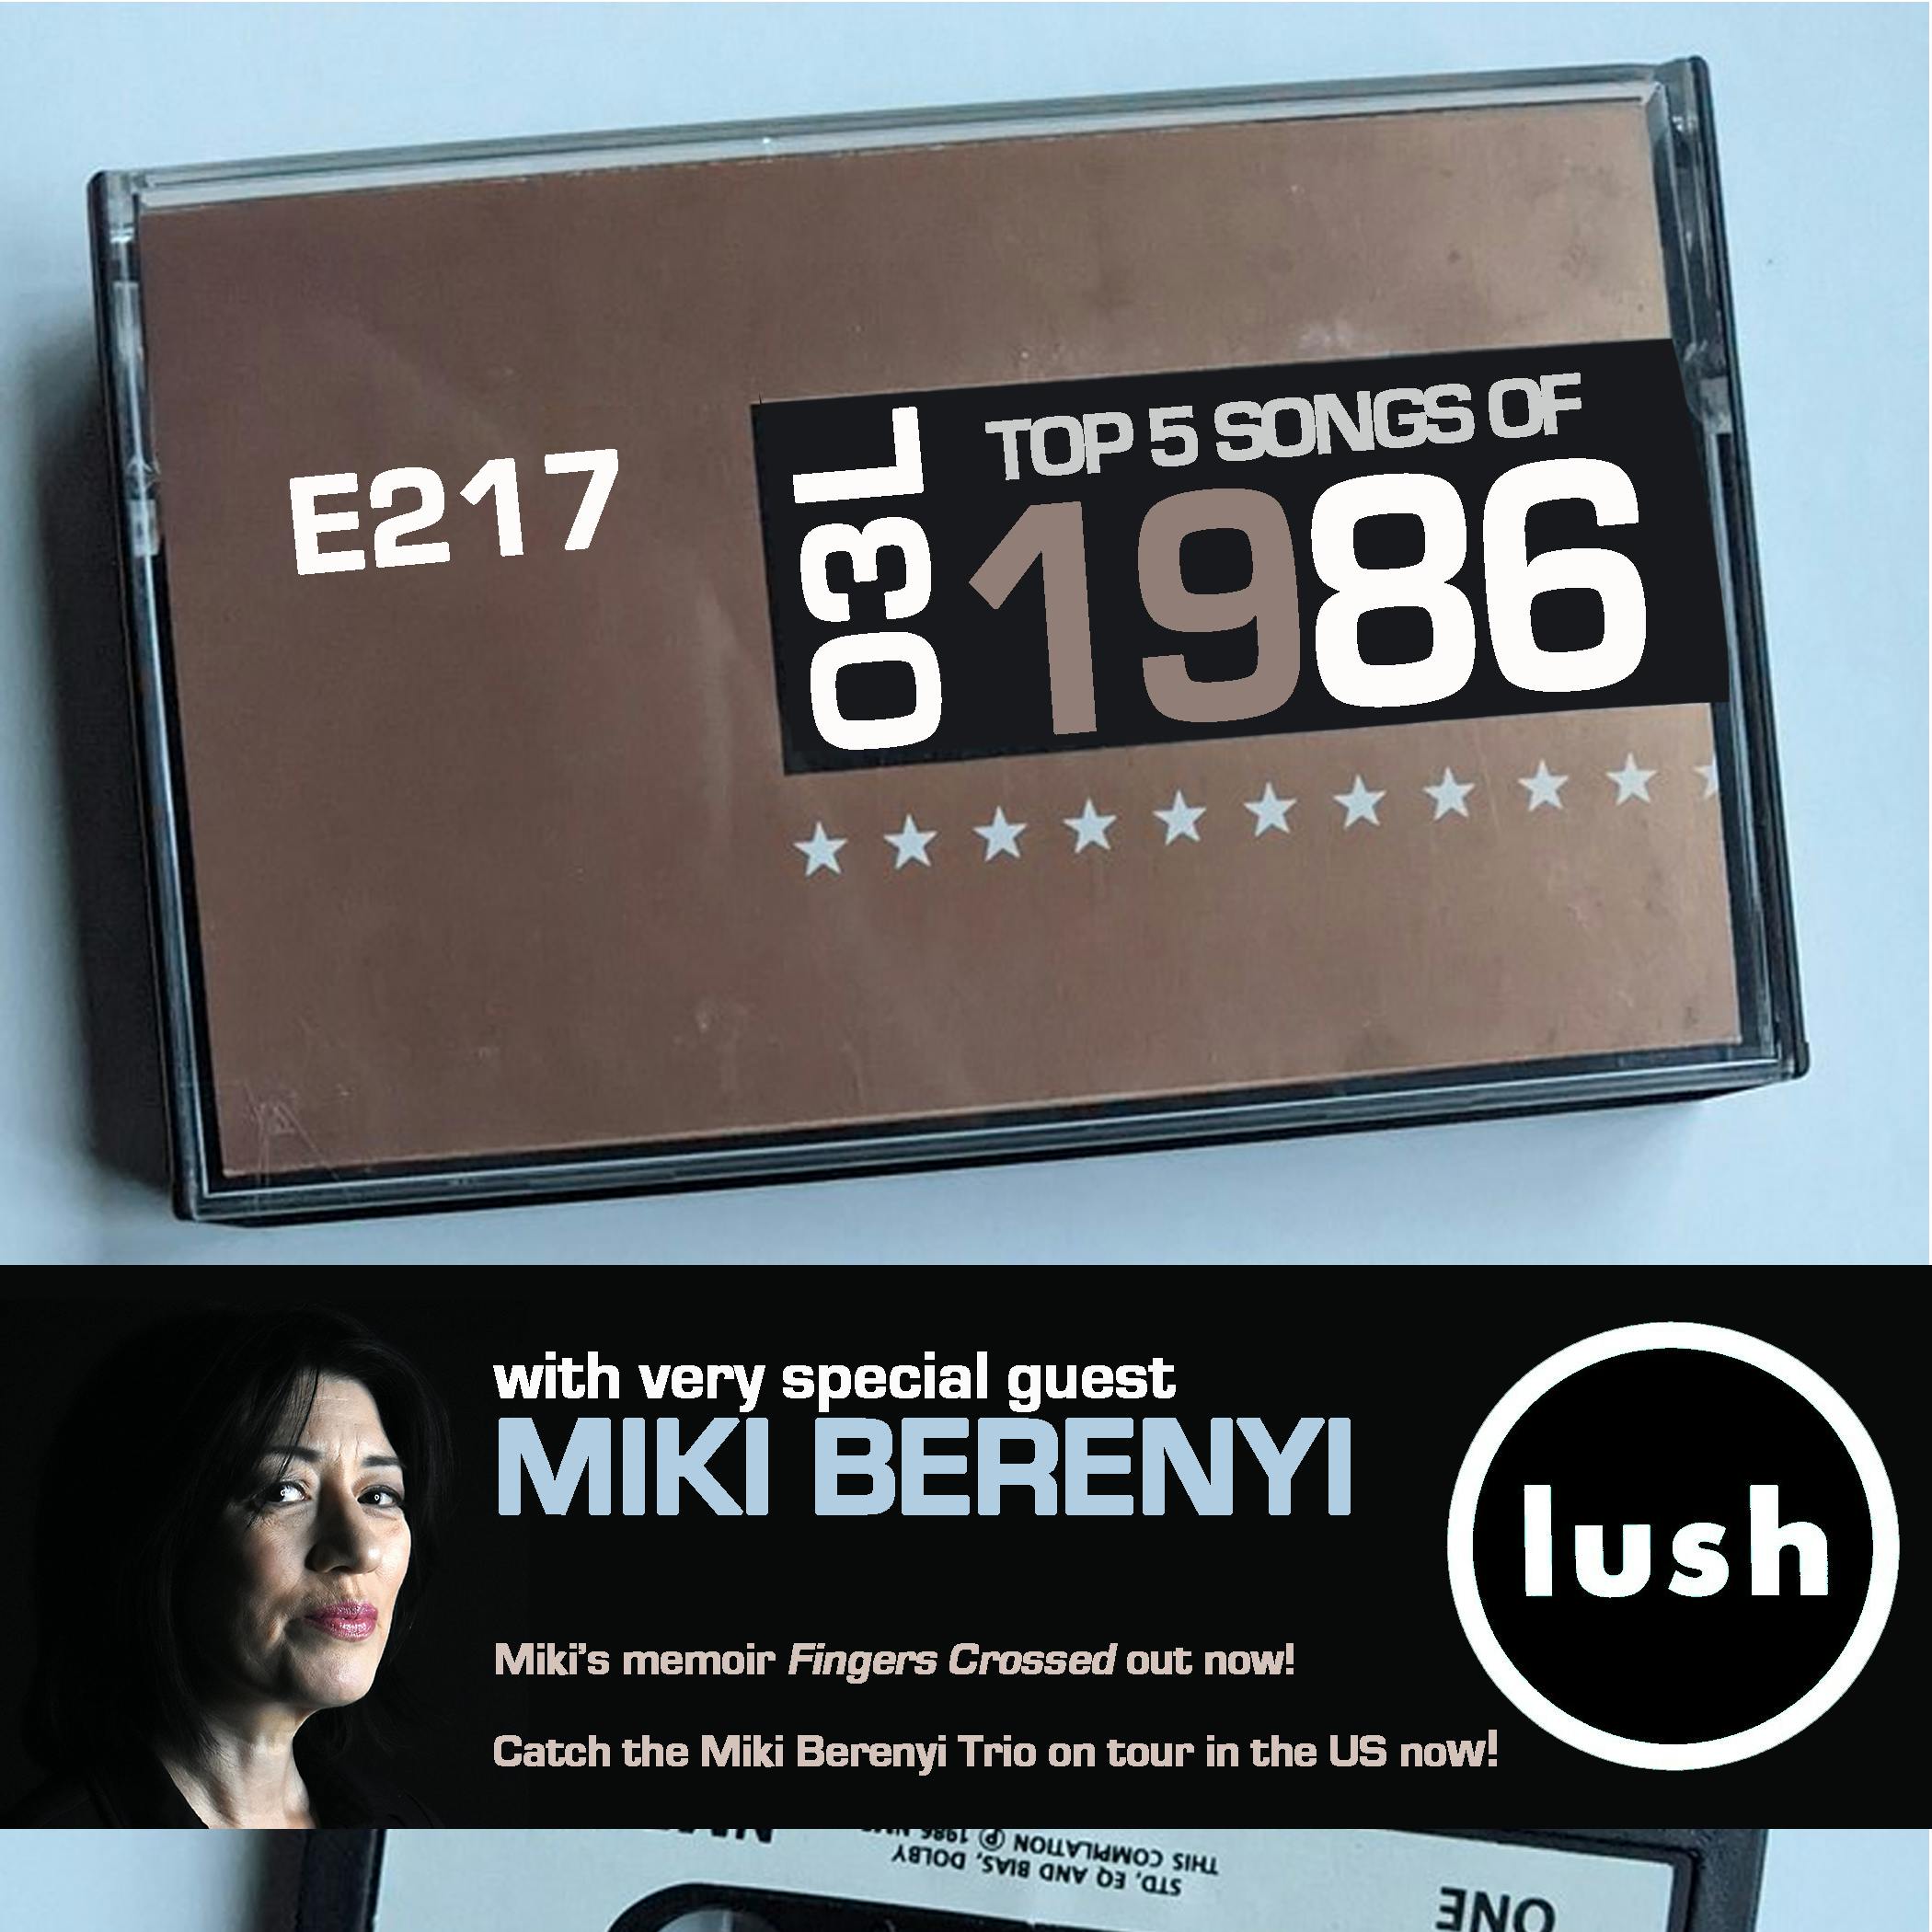 E217 - Miki Berenyi from Lush - Top 5 Songs of 1986